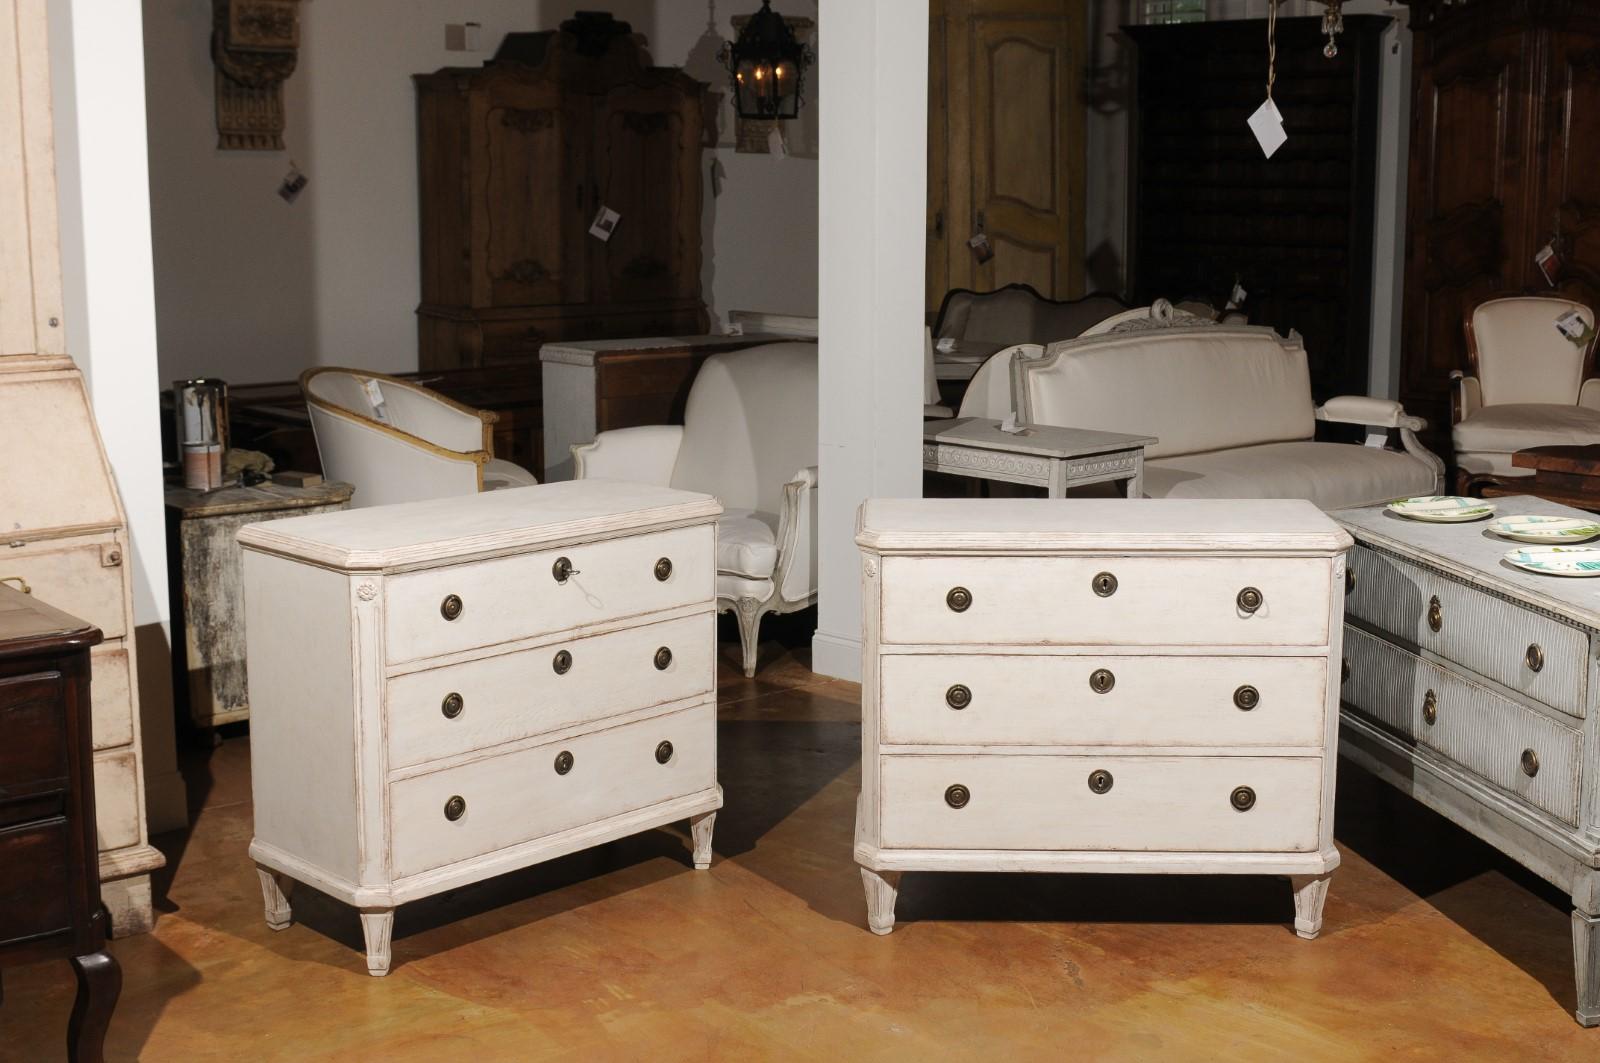 A pair of Swedish cream painted Gustavian style three-drawer commodes from the late 19th century, with canted side posts and tapered feet. Born in Sweden during the last quarter of the 19th century, each of these wooden chests features the stylistic